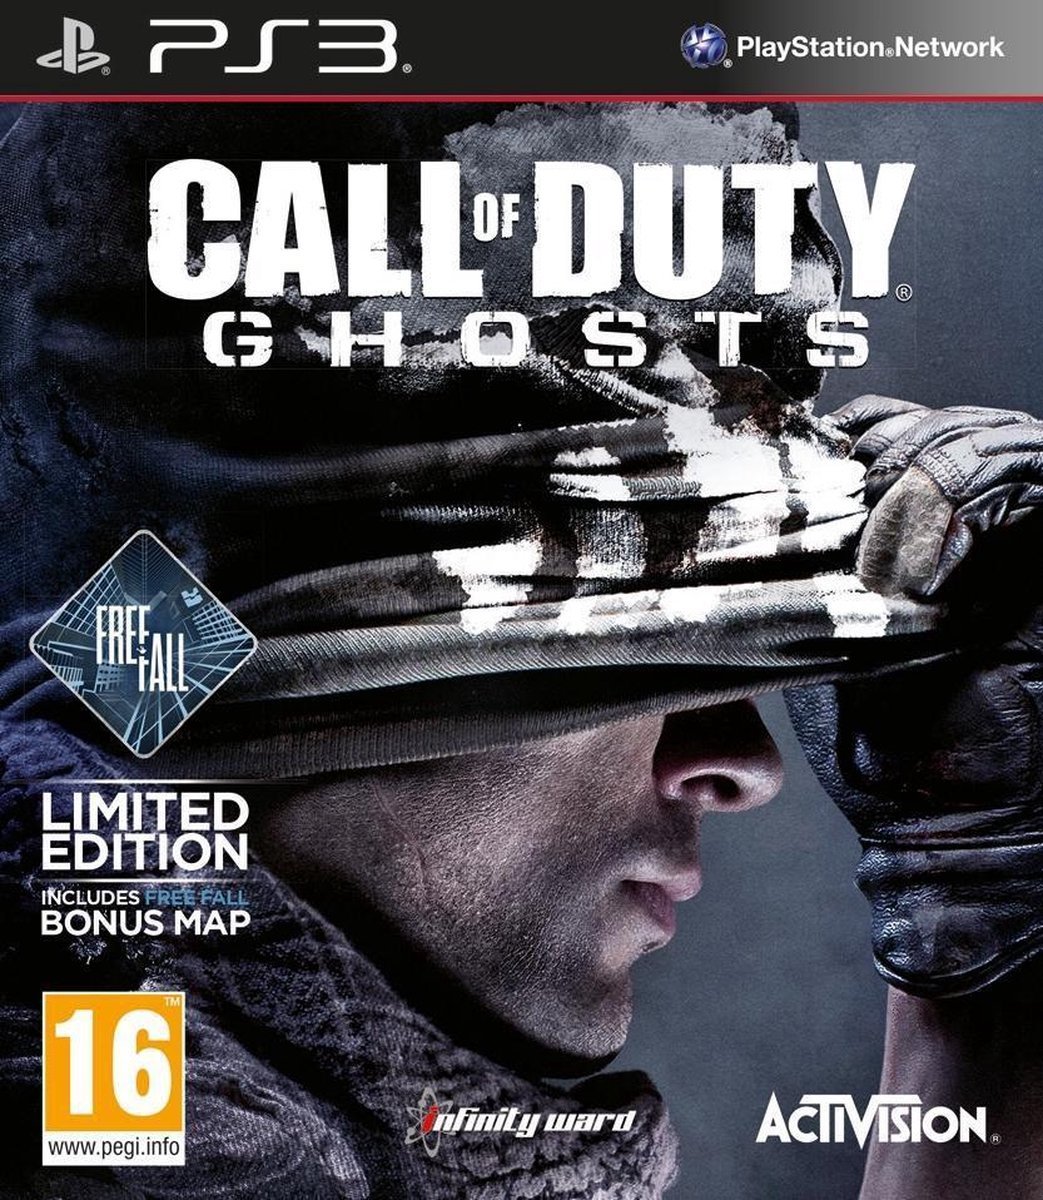 Call of Duty Ghosts - Free Fall Limited Edition von Call of Duty